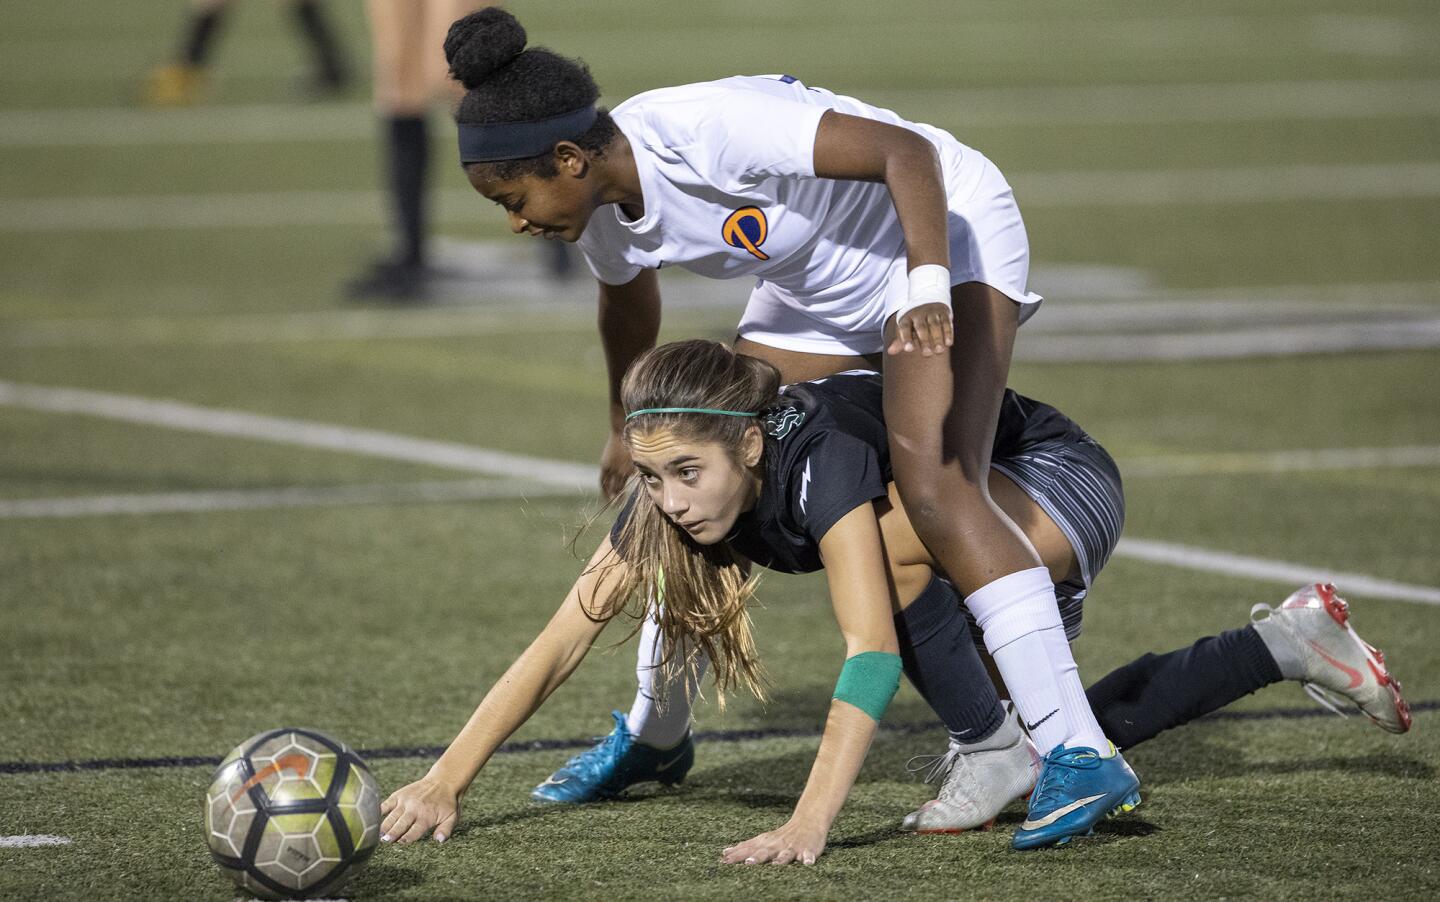 Photo Gallery: Pacifica Christian Orange County vs. Sage Hill in girls’ soccer